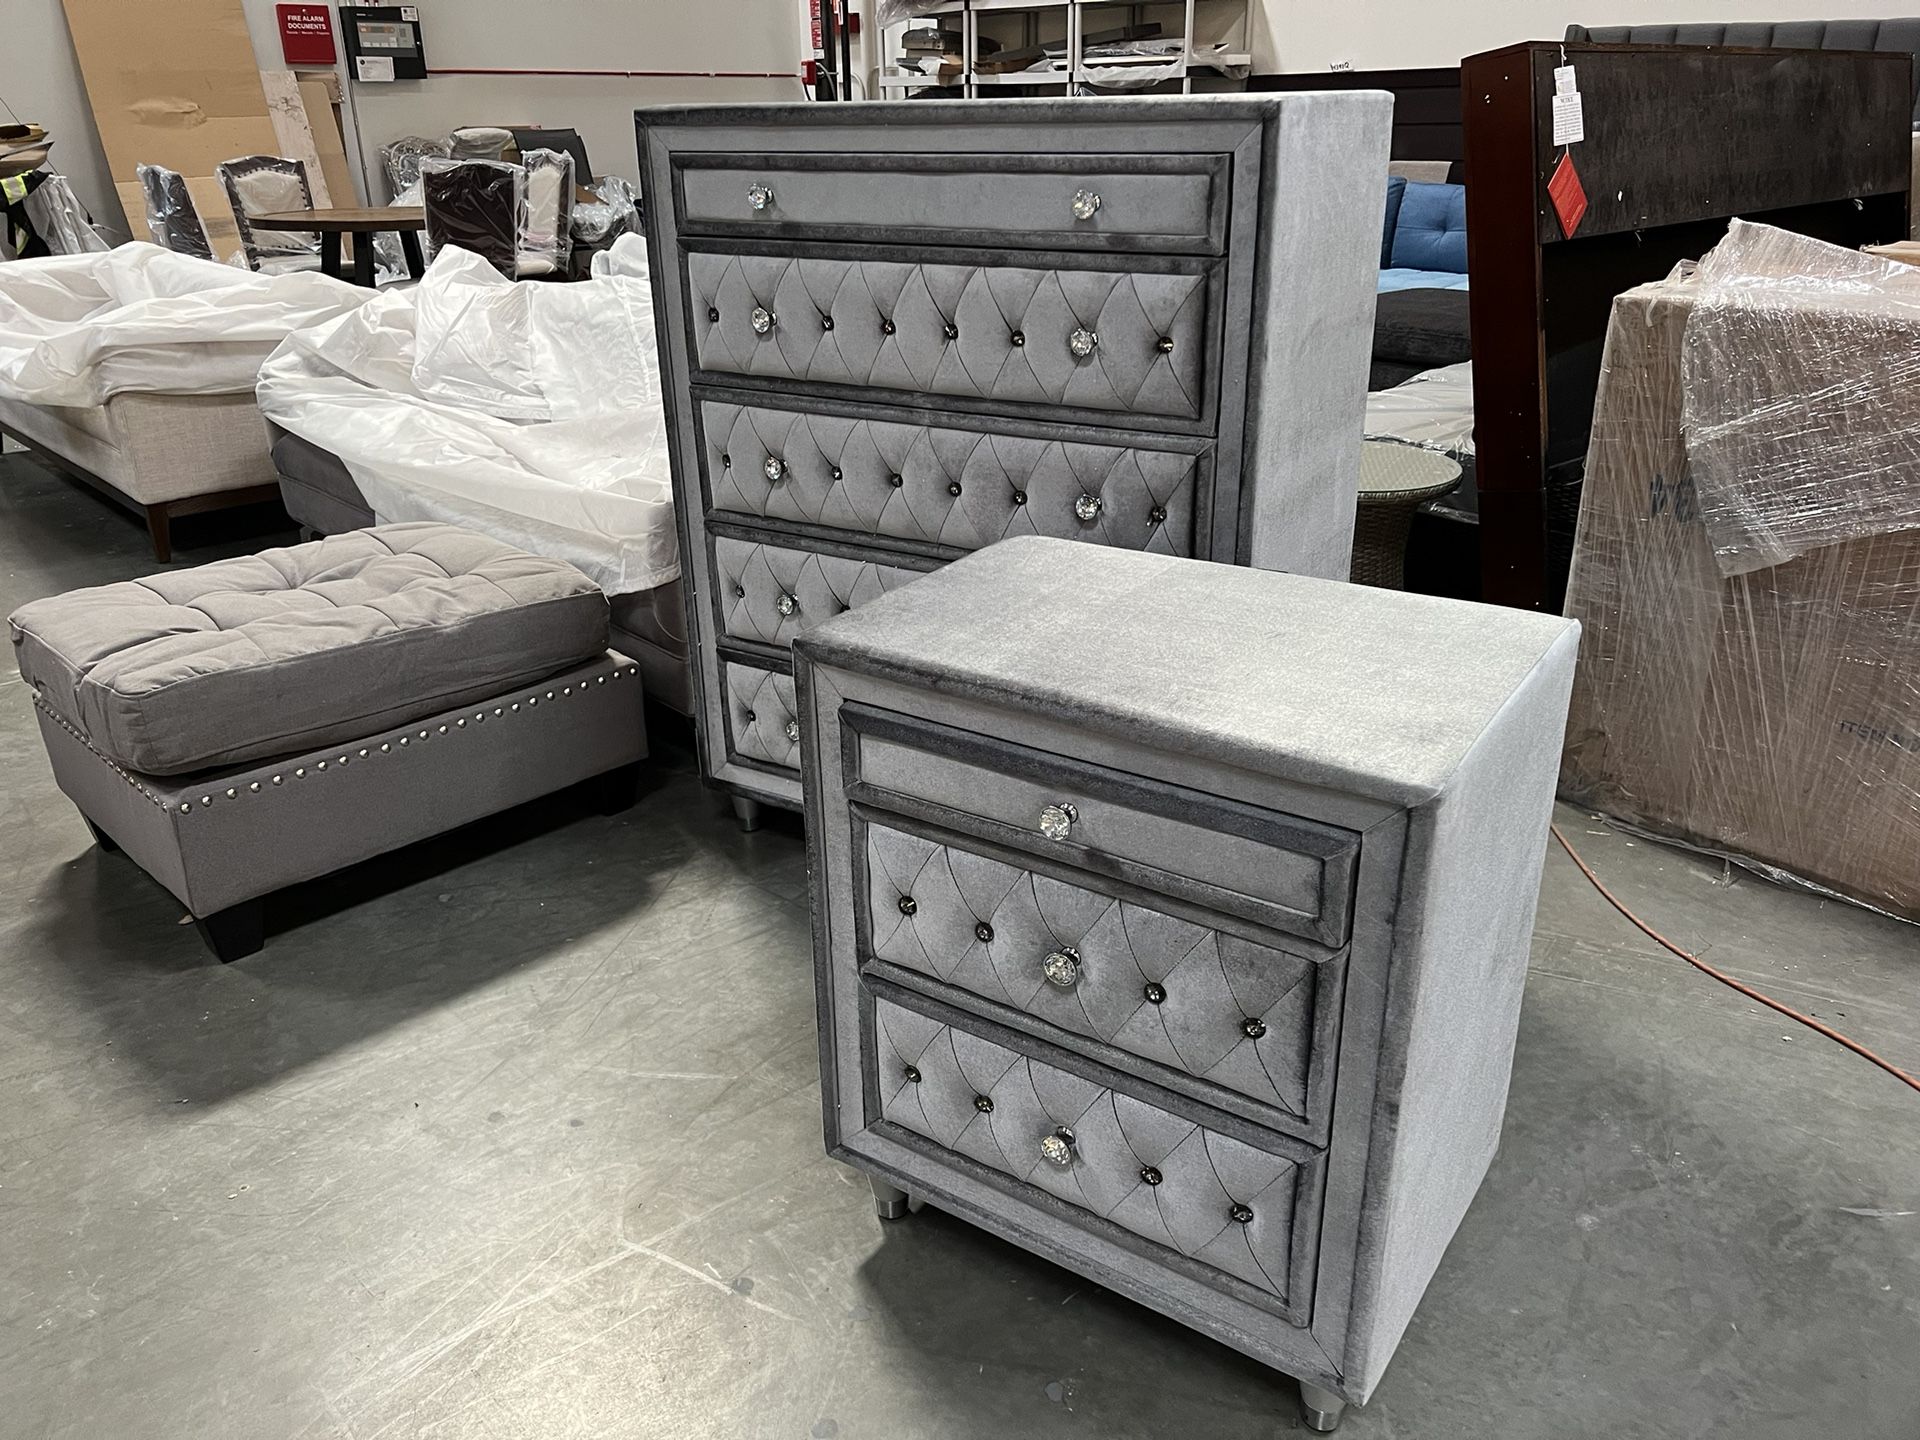 !!!New!!! Bedroom Furniture, Grey 5-Drawer Chest, Upholstered Chest In Grey, Dovetailed Drawers Chest, Dresser, Nightstand Available 